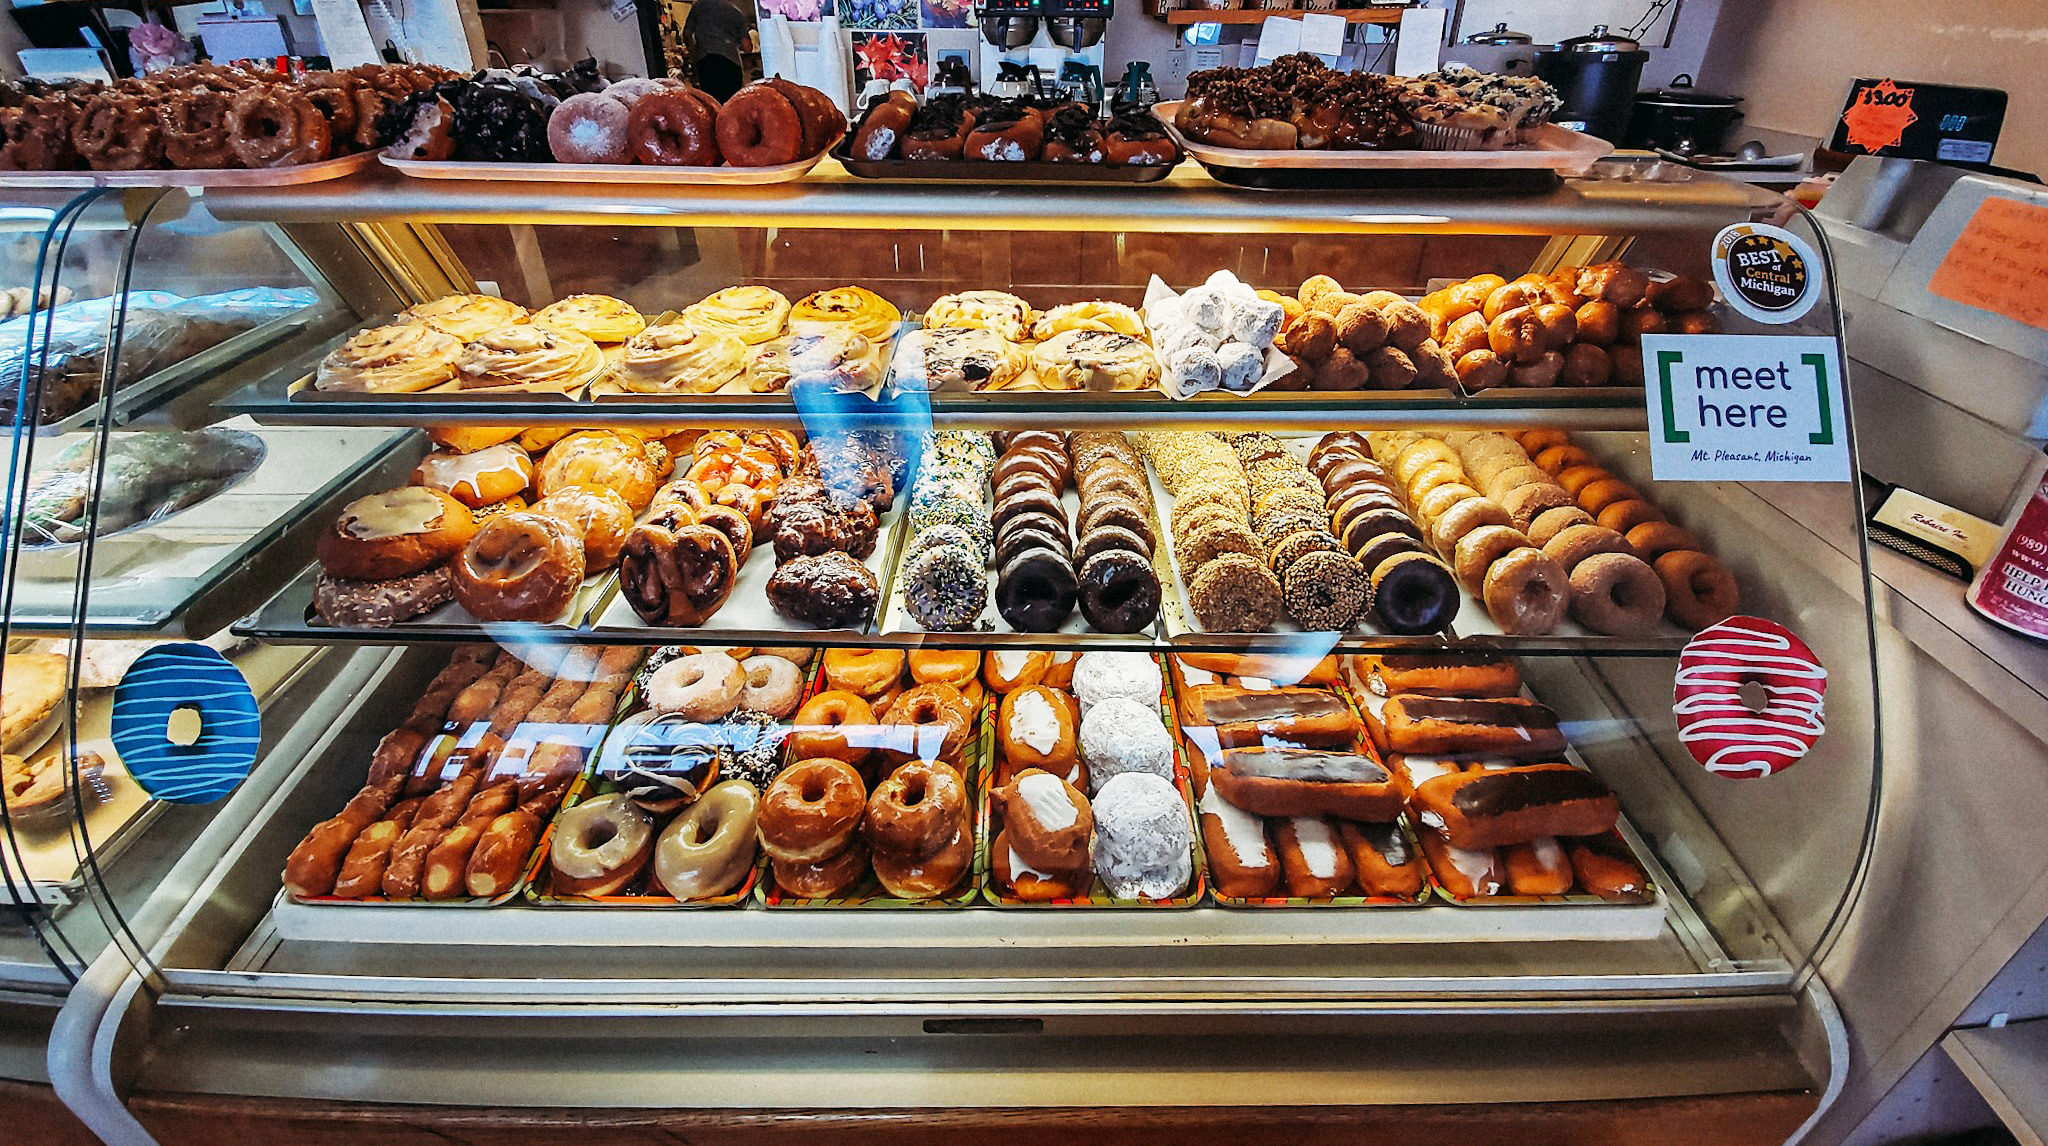 Robaire's Bakery, a locally-owned bake shop's display of homemade doughnuts, cinnamon rolls, breads and more in Mt. Pleasant, Michigan.